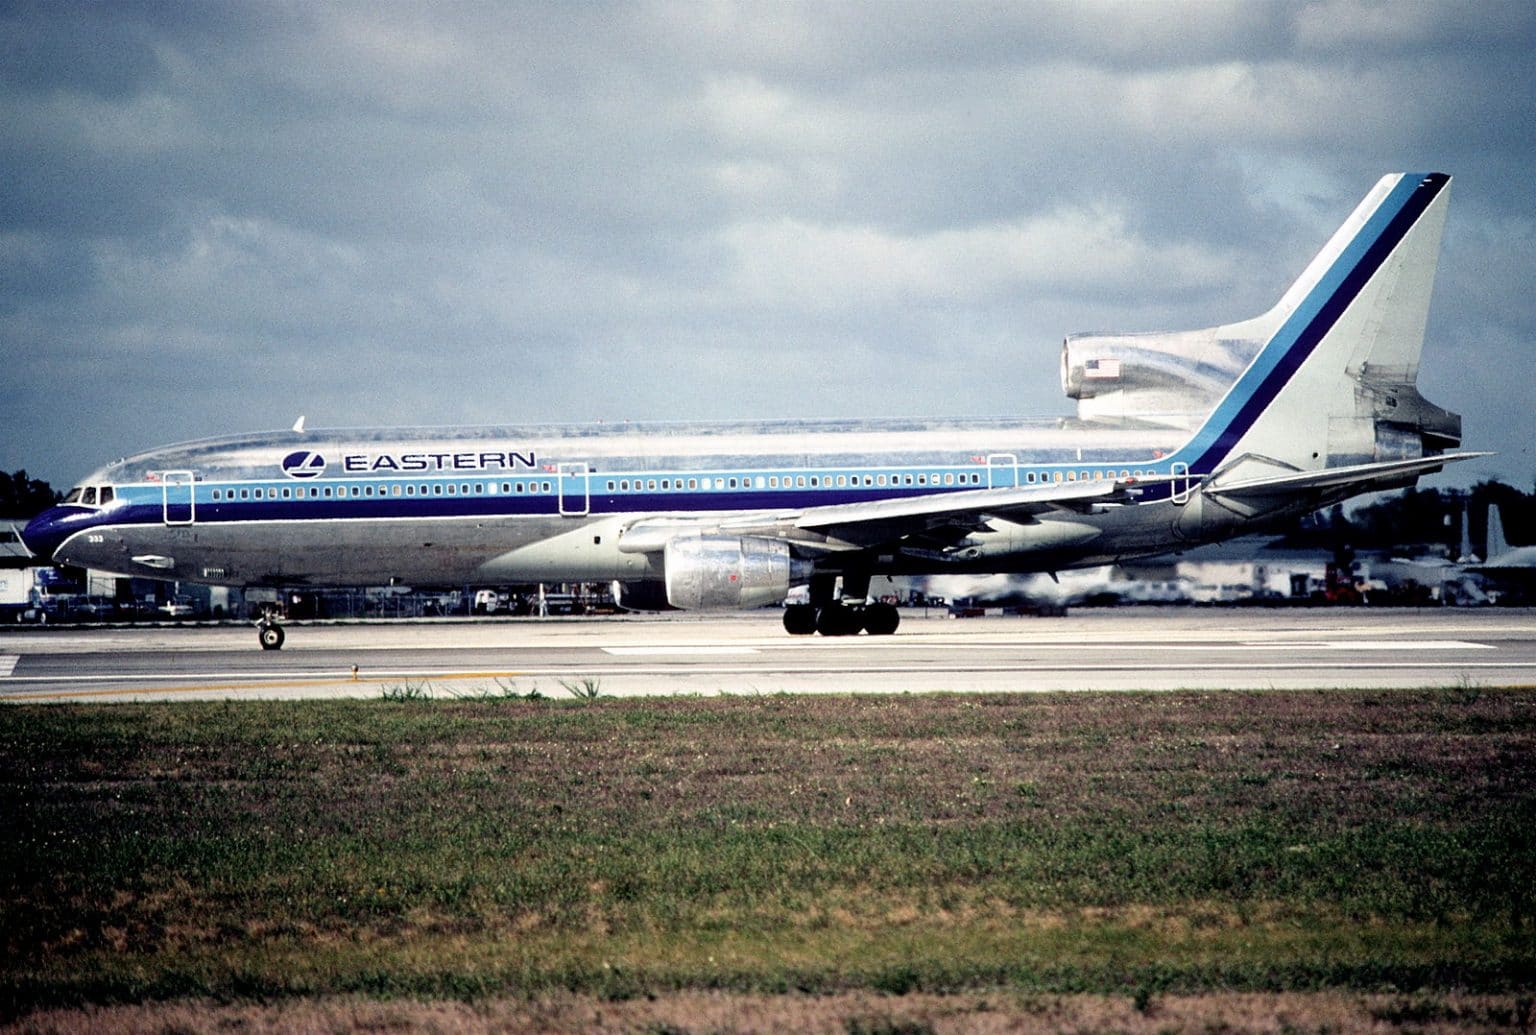 The Lockheed L-1011 Tristar Was an Over-Engineered Masterpiece